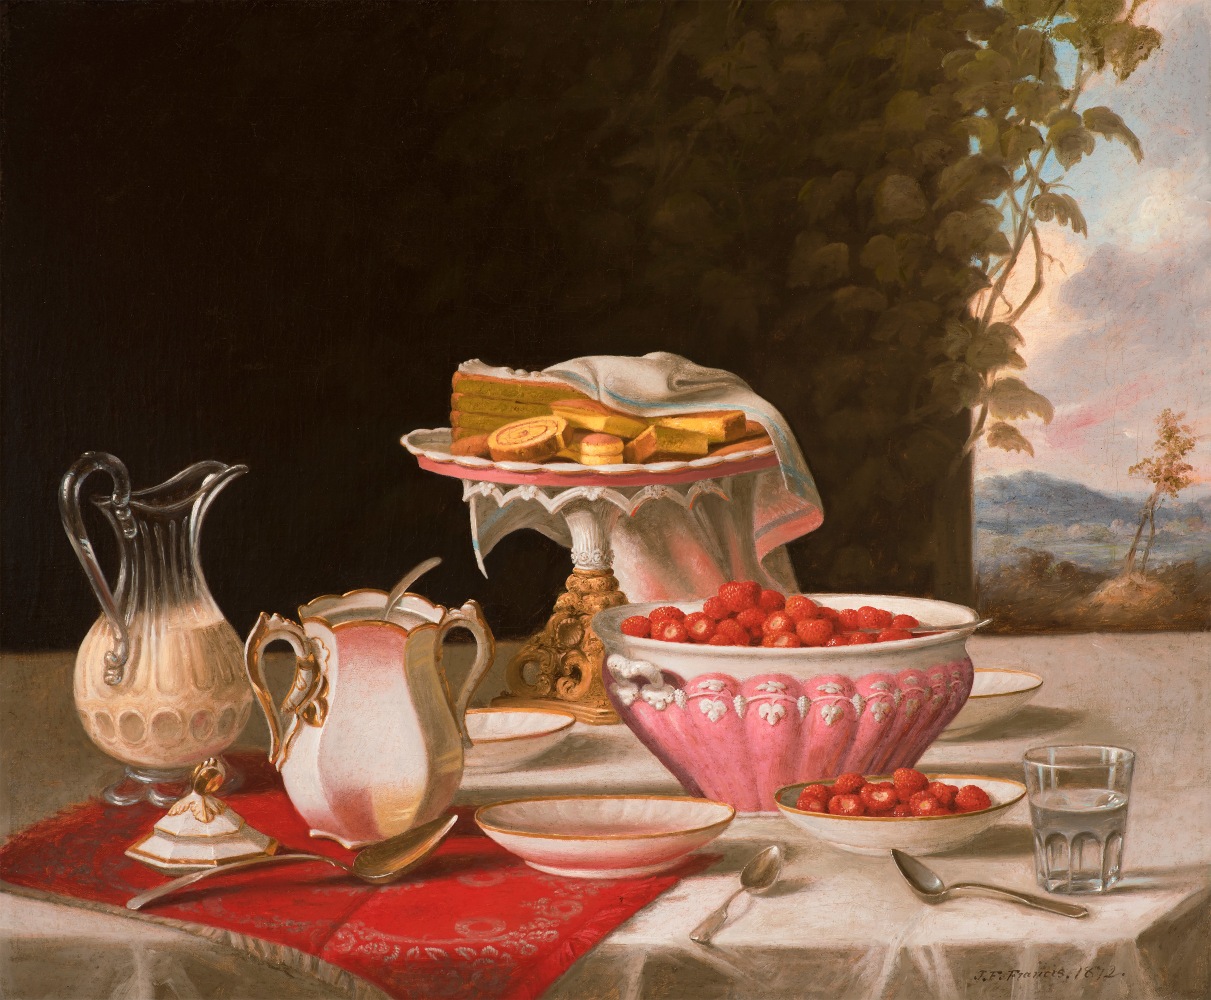 John F. Francis (1808–1886), The Dessert, 1872, oil on canvas, 25 x 30 ½ in., signed and dated lower right: J.F. Francis. 1872.